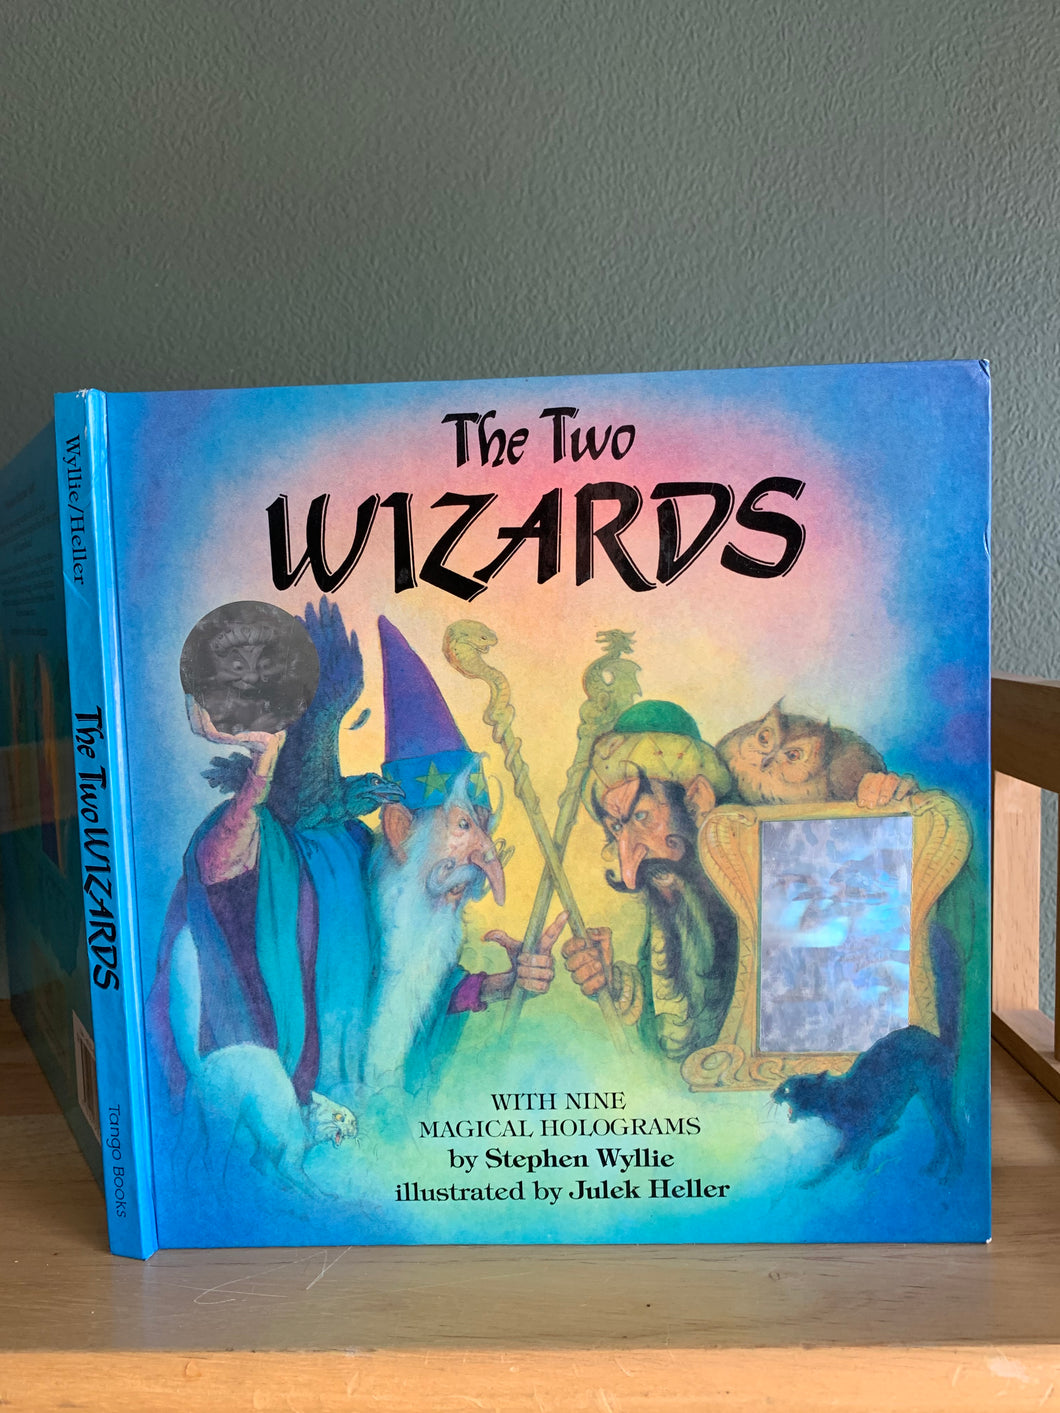 The Two Wizards. A Magical Hologram Book